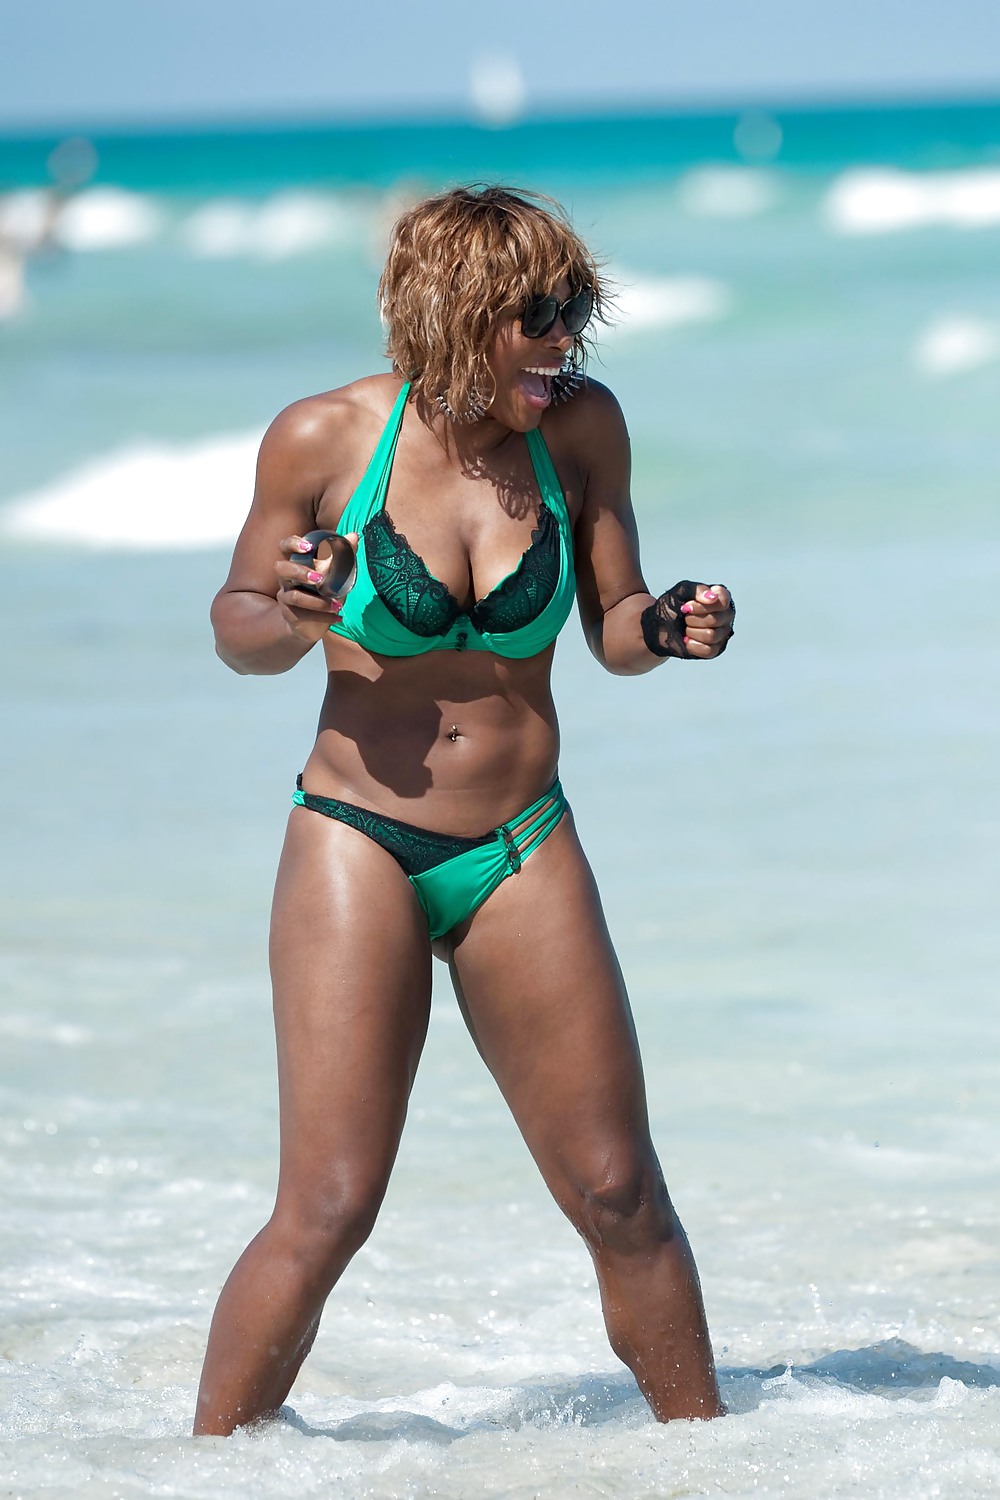 Serena williams monster ass and boobs on the beach in miami
 #3191444